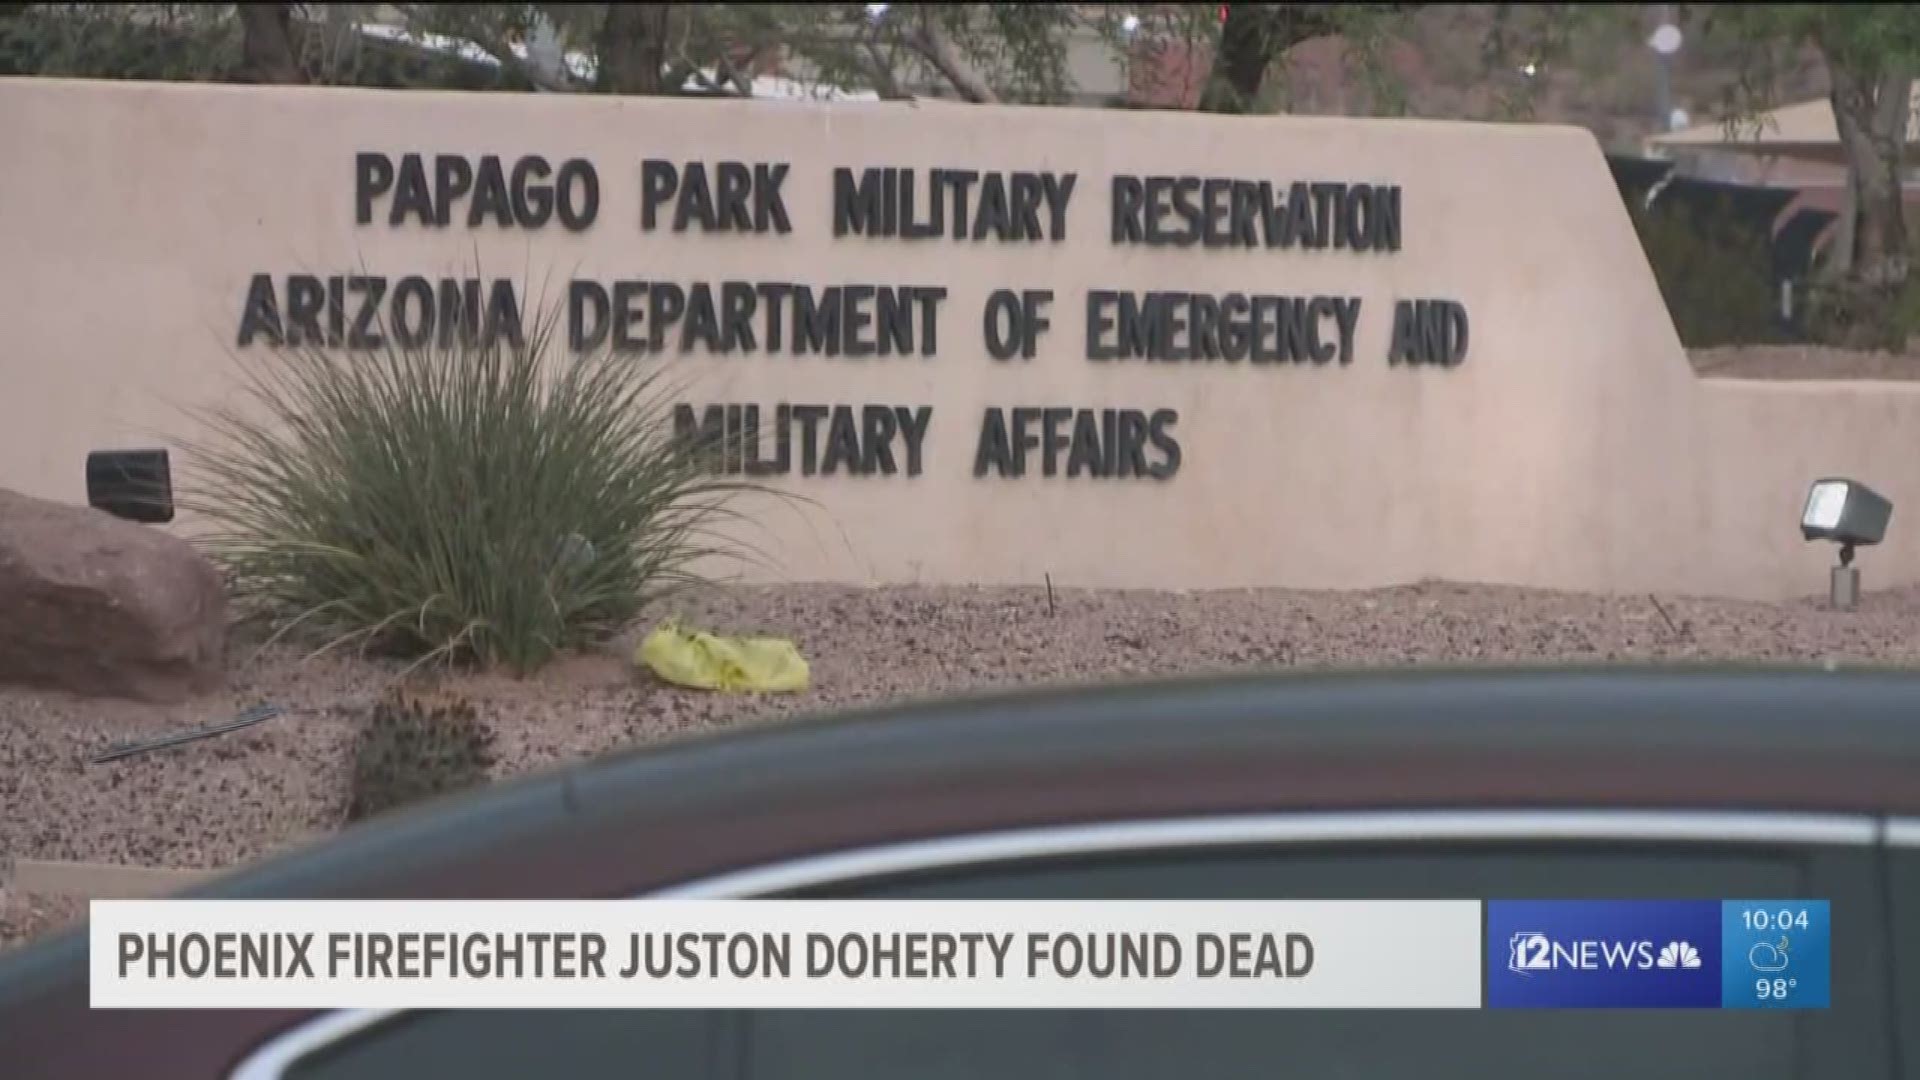 Juston Doherty died of apparent natural causes, according to the United Phoenix Firefighters.